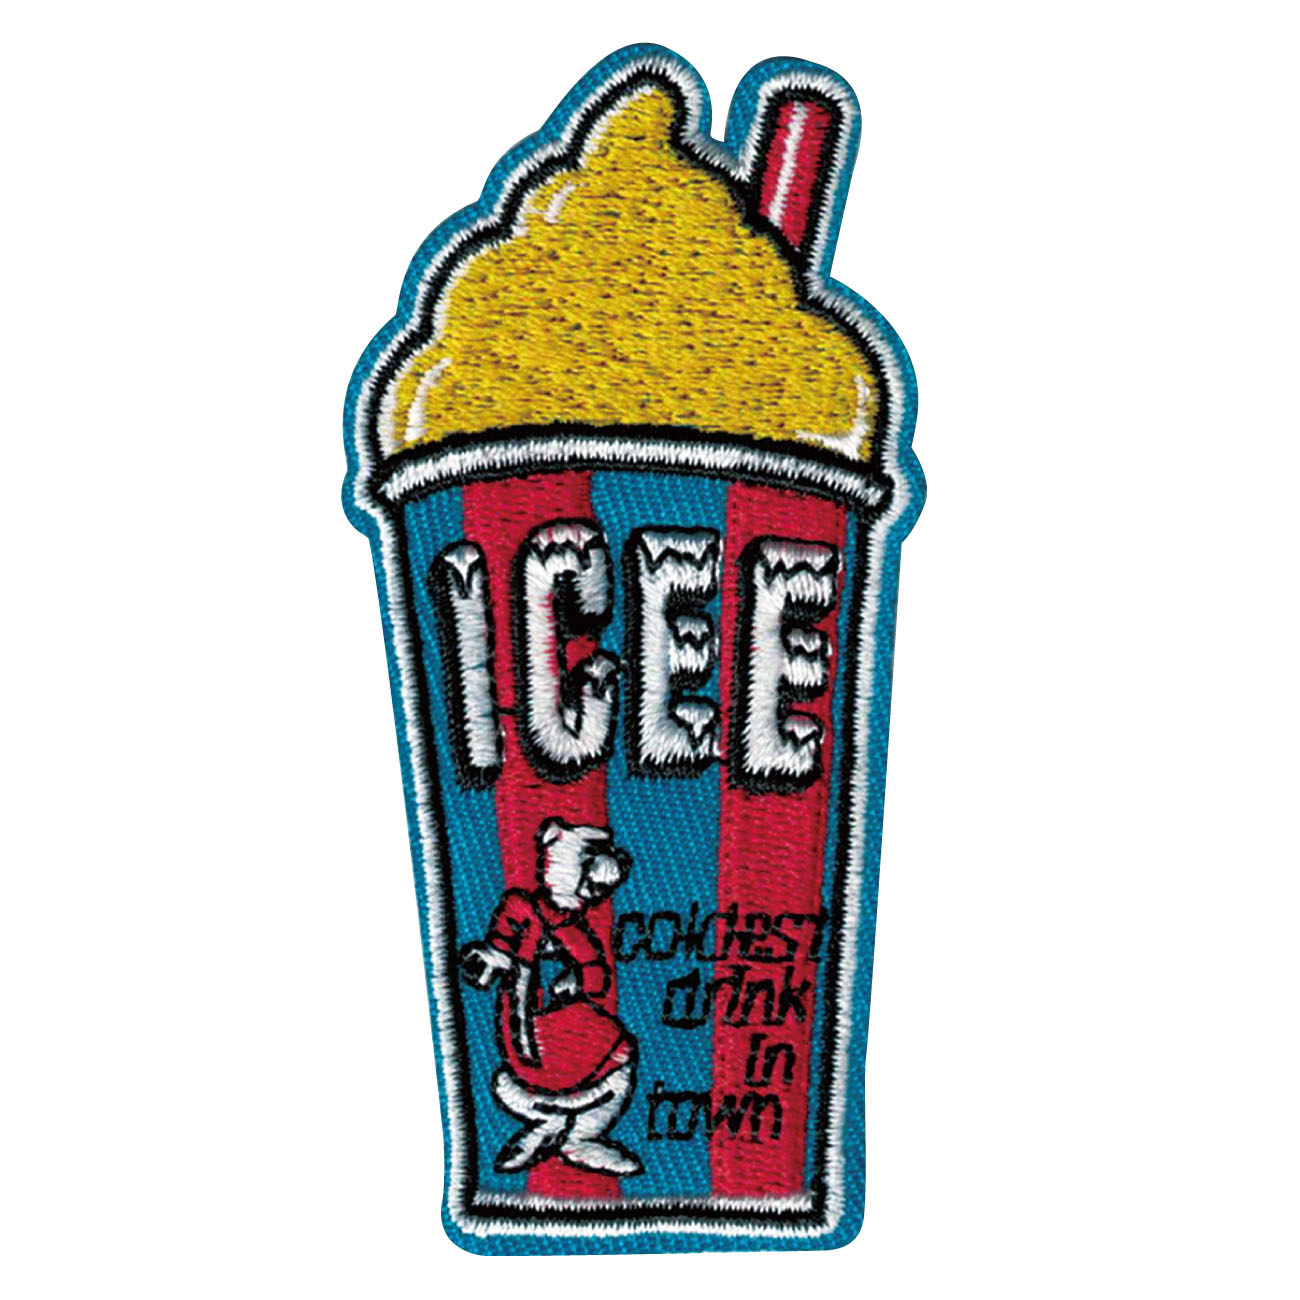 WAPPEN【ICEE CUP YELLOW】